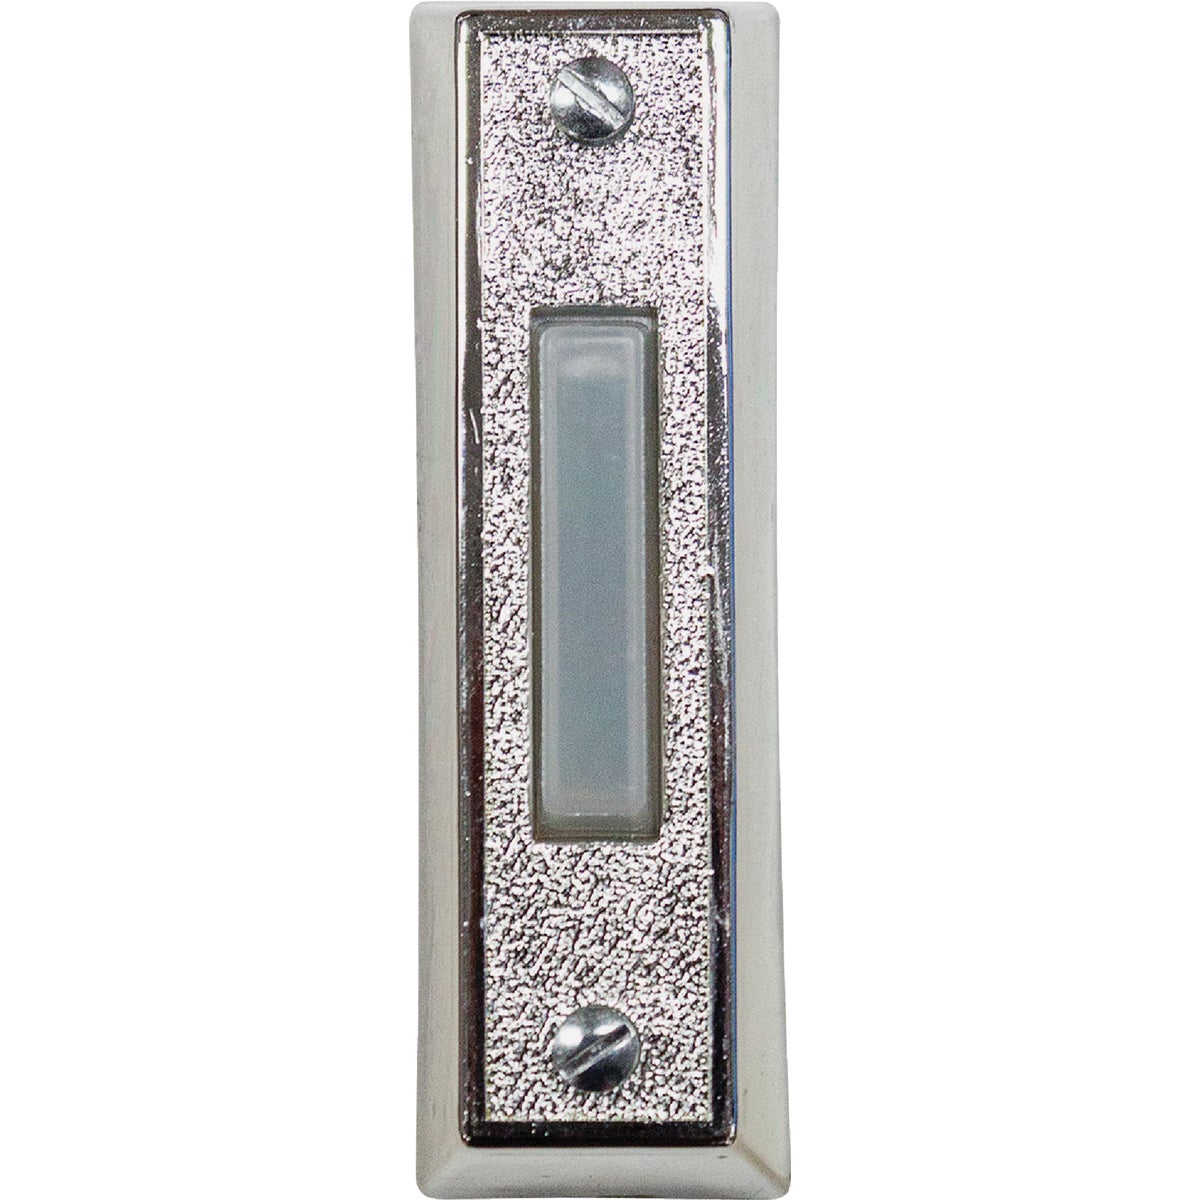 Item 521159, Wired push-button. Rectangular design with LED lighted, push-button.